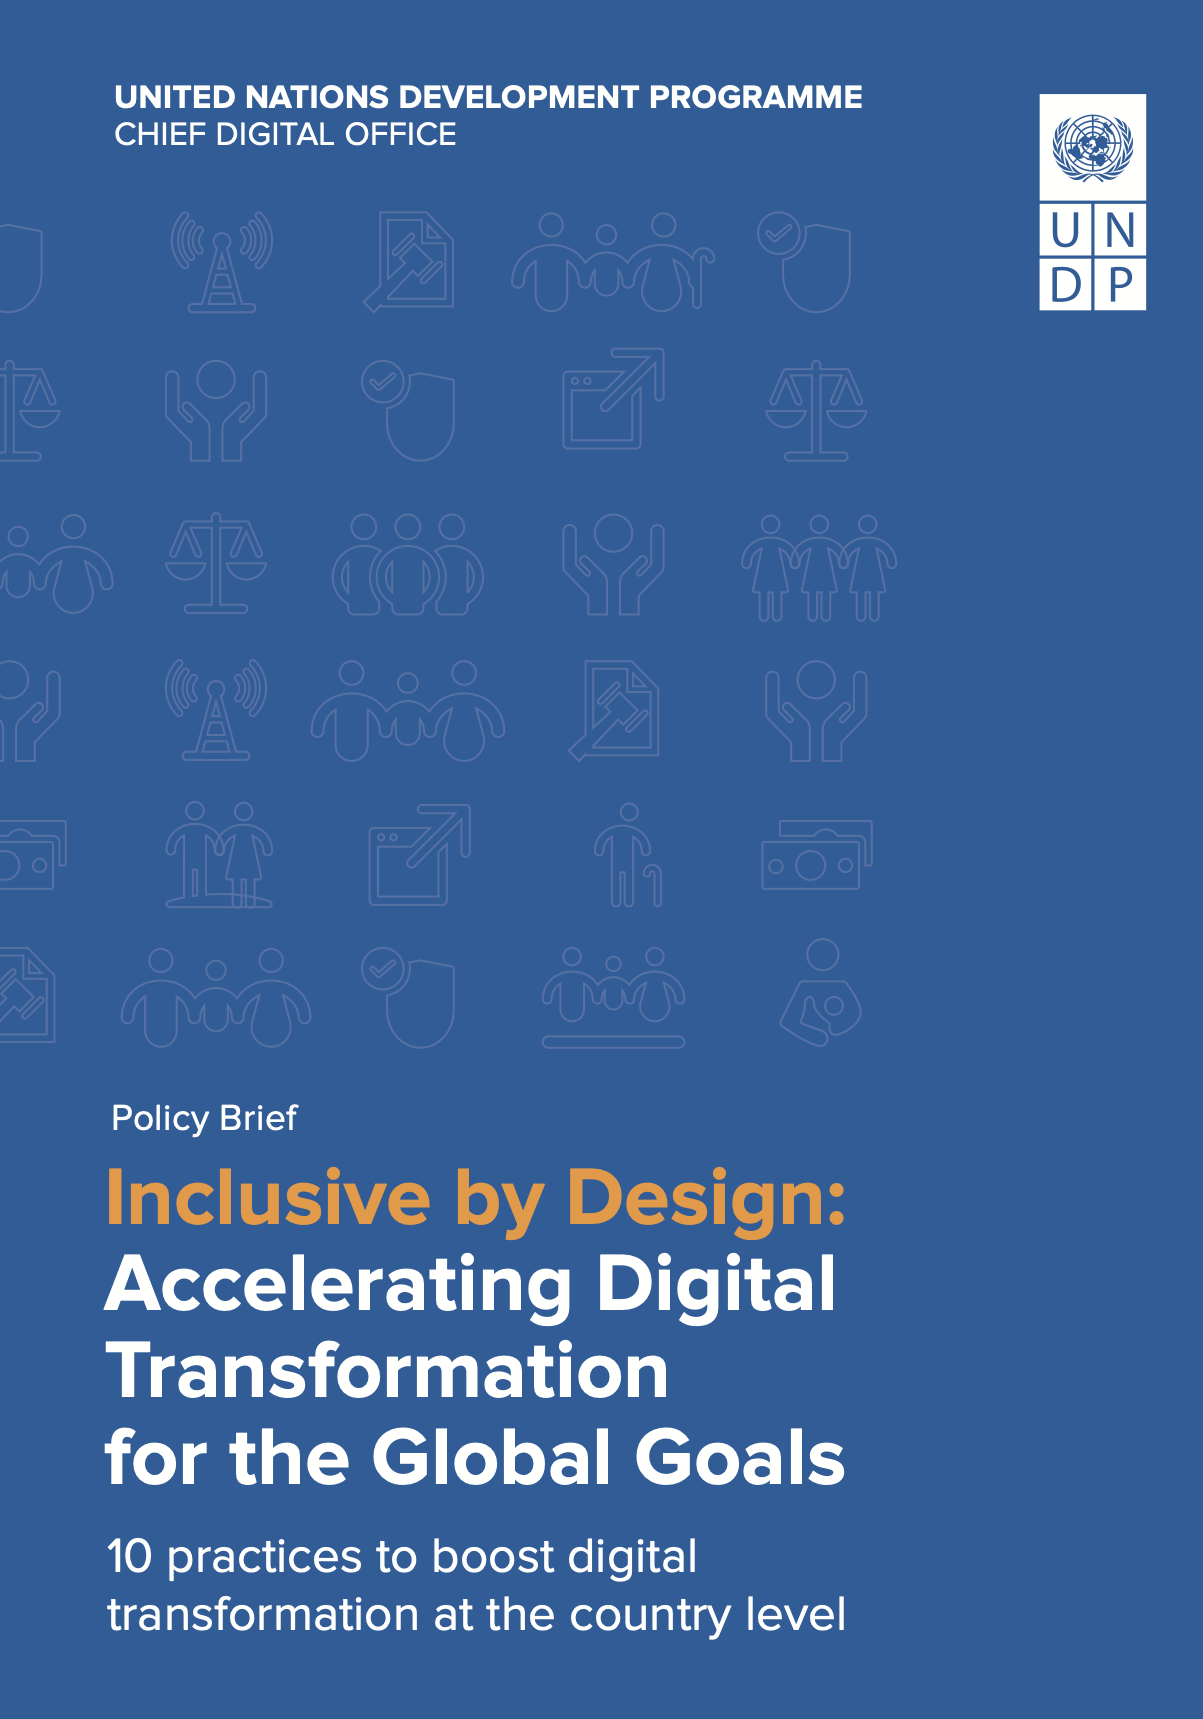 Inclusive by Design: Accelerating Digital Transformation for the Global Goals